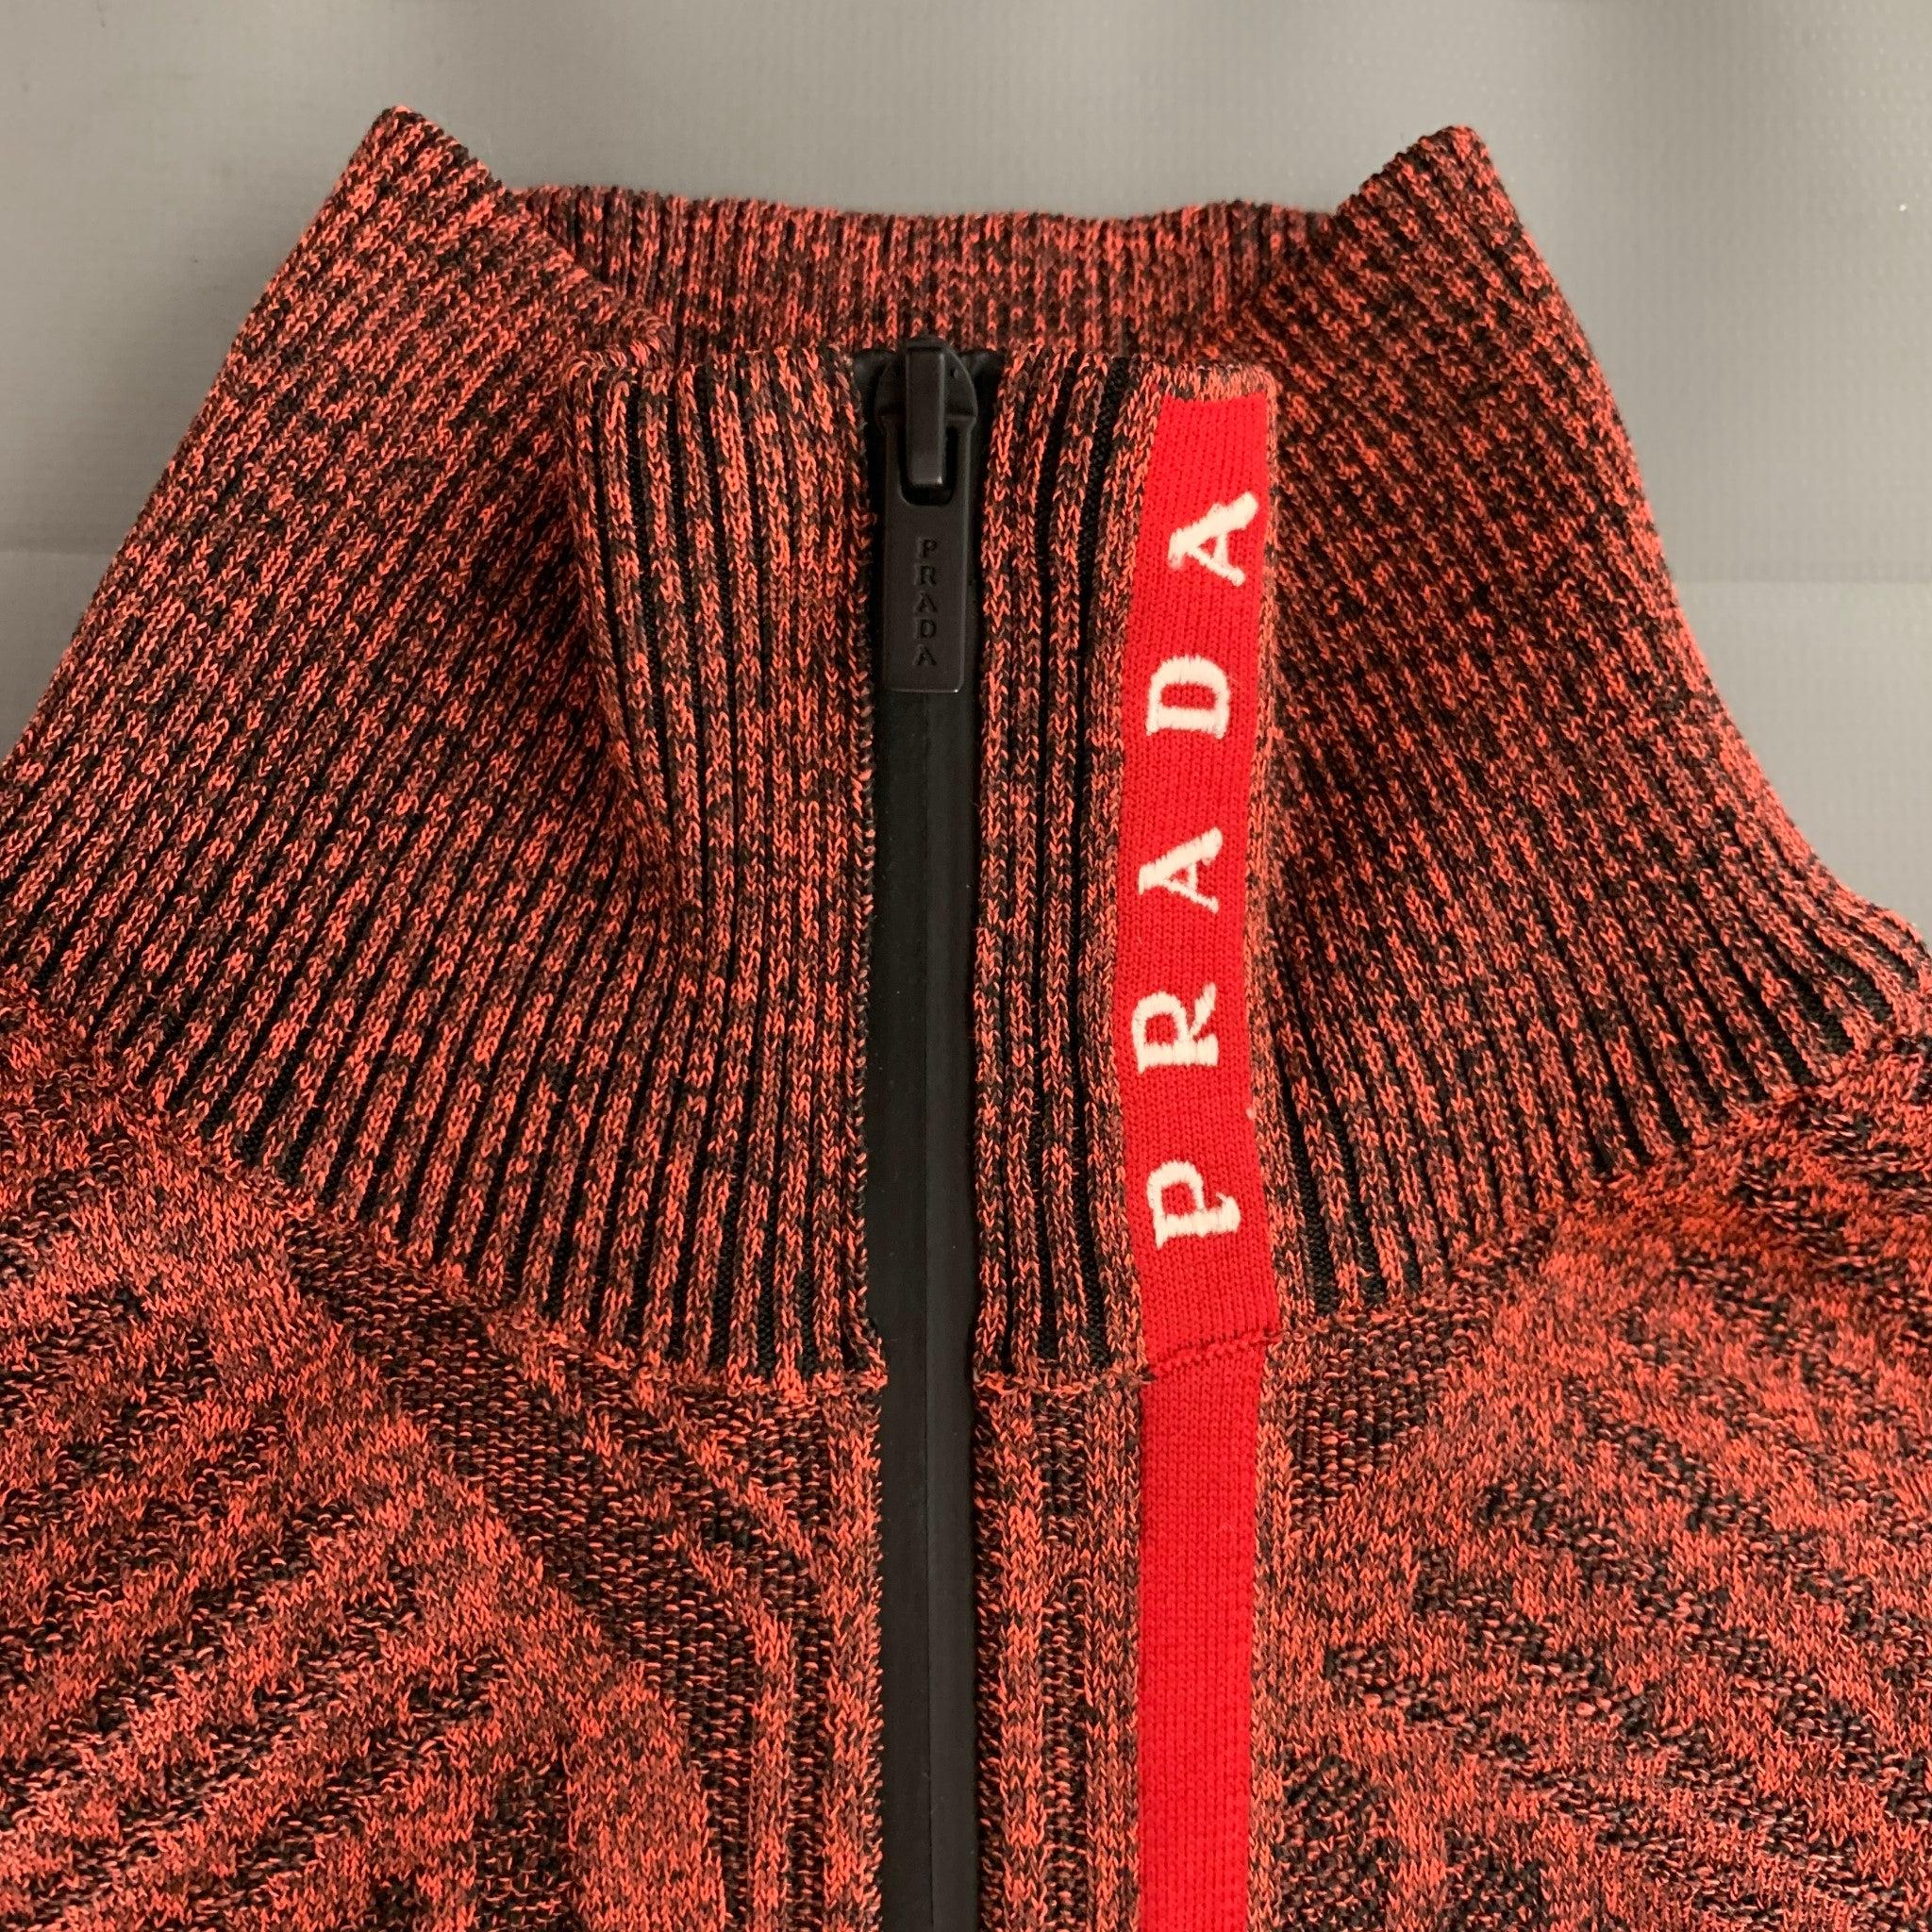 PRADA SPORT crop top comes in orange and black japanese yard knit material featuring a 1/4 zipper detail, and high neck. Made in Italy.Excellent Pre-Owned Condition. 

Marked:   XS 

Measurements: 
  Bust: 31 inches Length: 15 inches  
  
  
